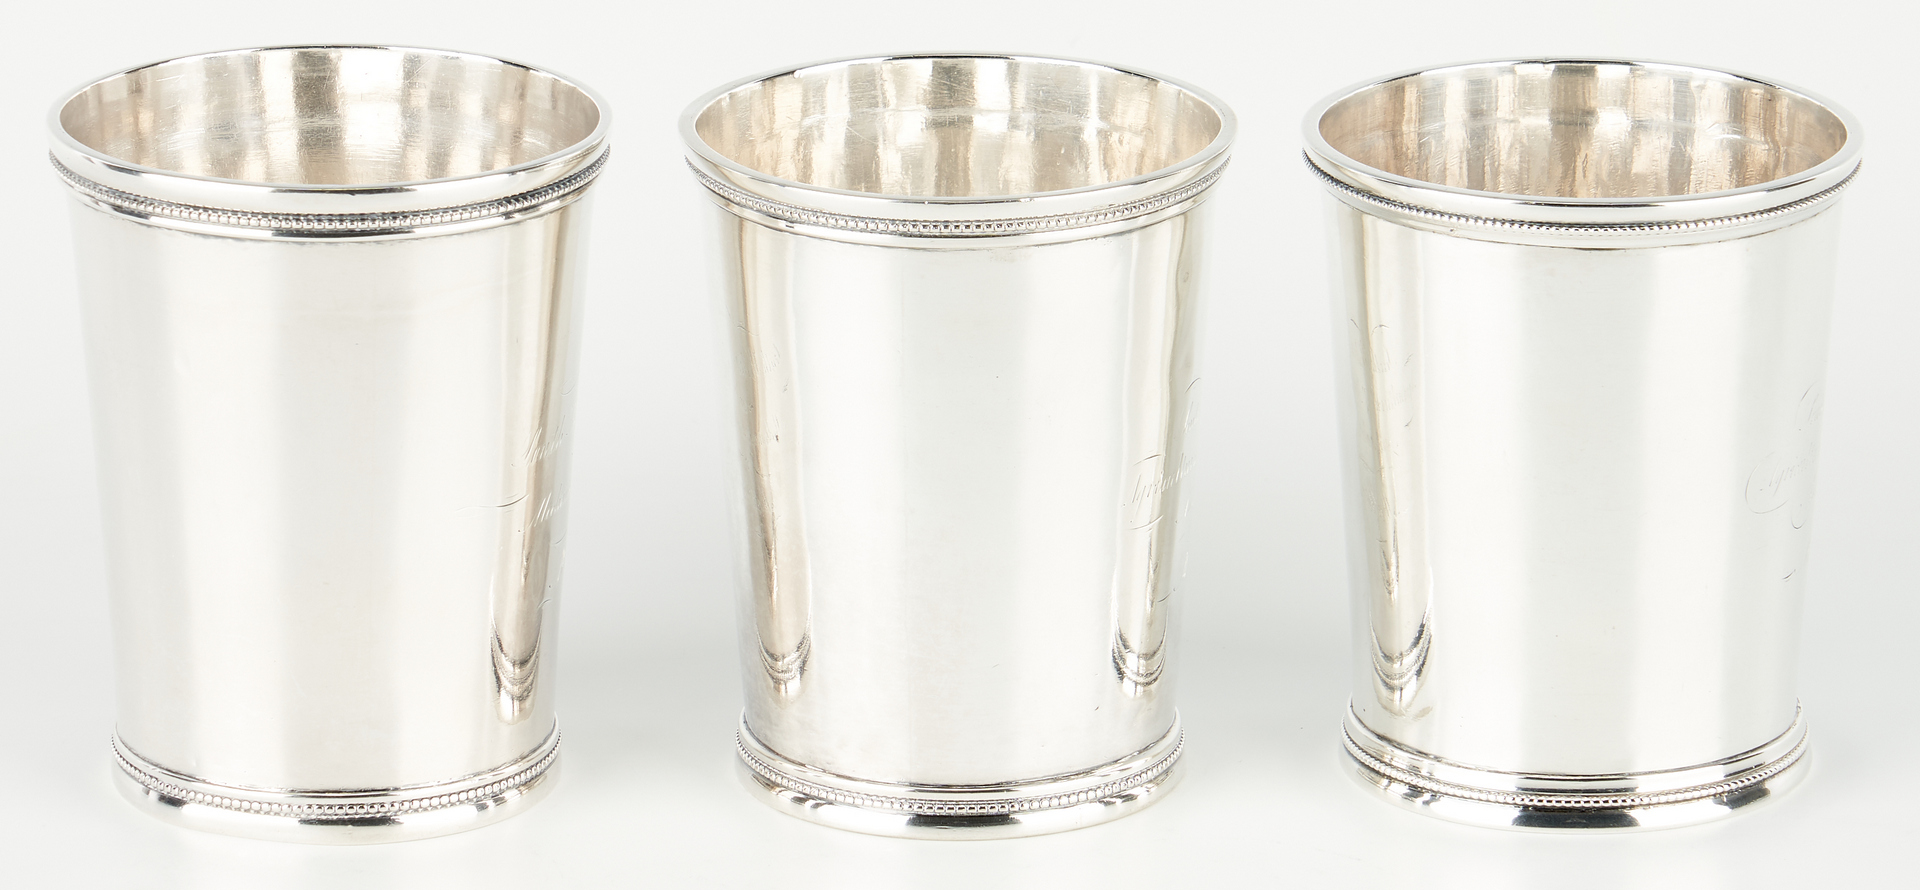 Lot 116: 3 Kitts Agricultural Premium Mint Julep cups, Mallory